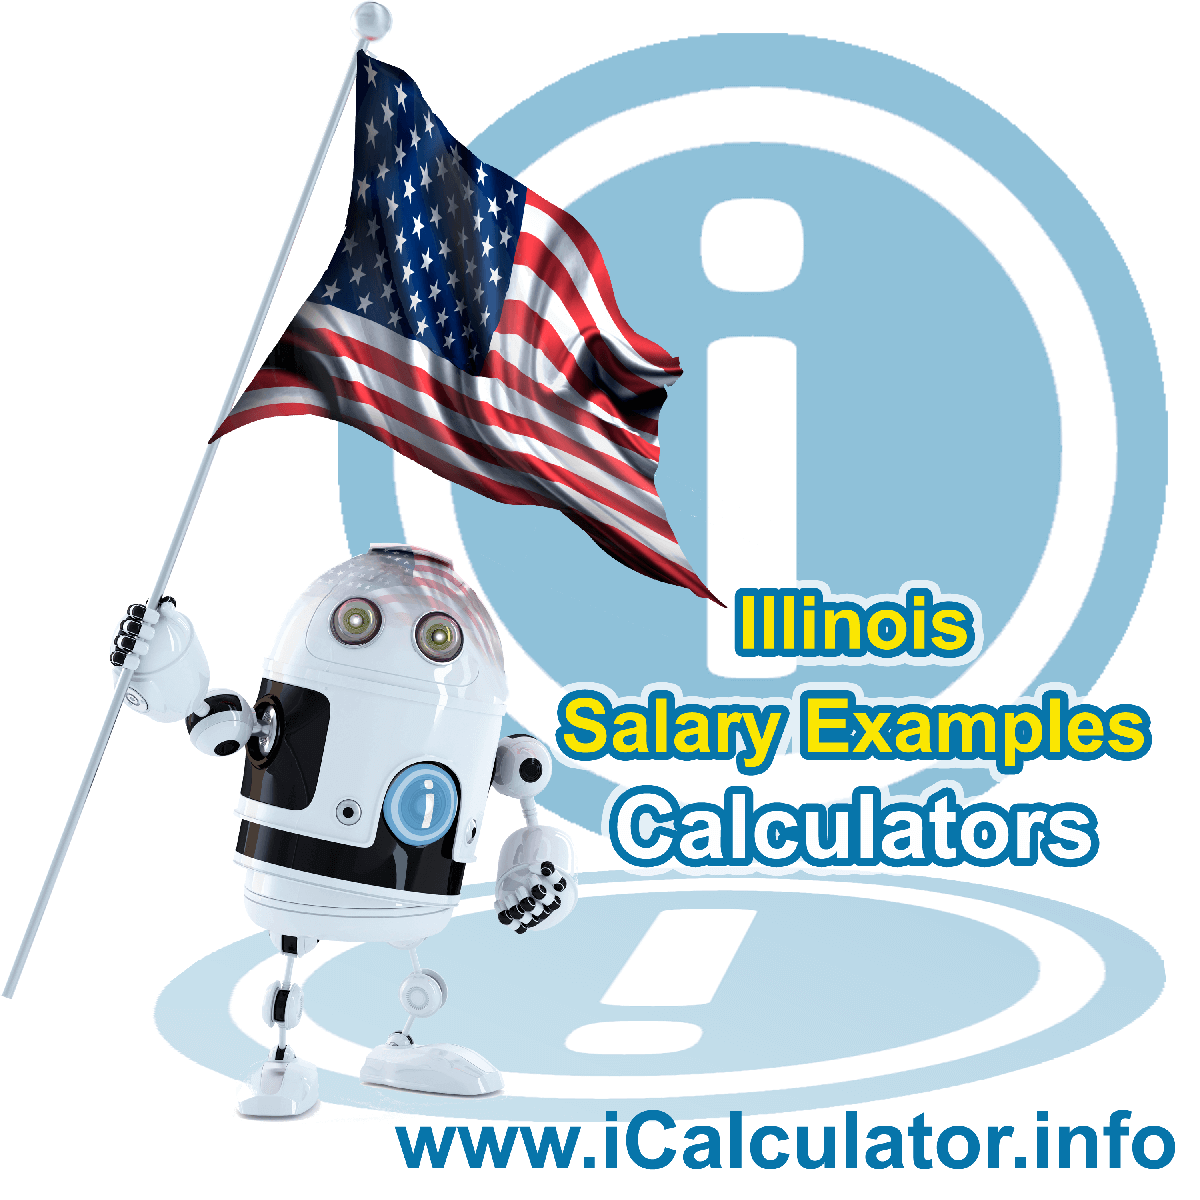 Illinois Salary Example for $ 60,000.00 in 2023 | iCalculator™ | $ 60,000.00 salary example for employee and employer paying Illinois State tincome taxes. Detailed salary after tax calculation including Illinois State Tax, Federal State Tax, Medicare Deductions, Social Security, Capital Gains and other income tax and salary deductions complete with supporting Illinois state tax tables 